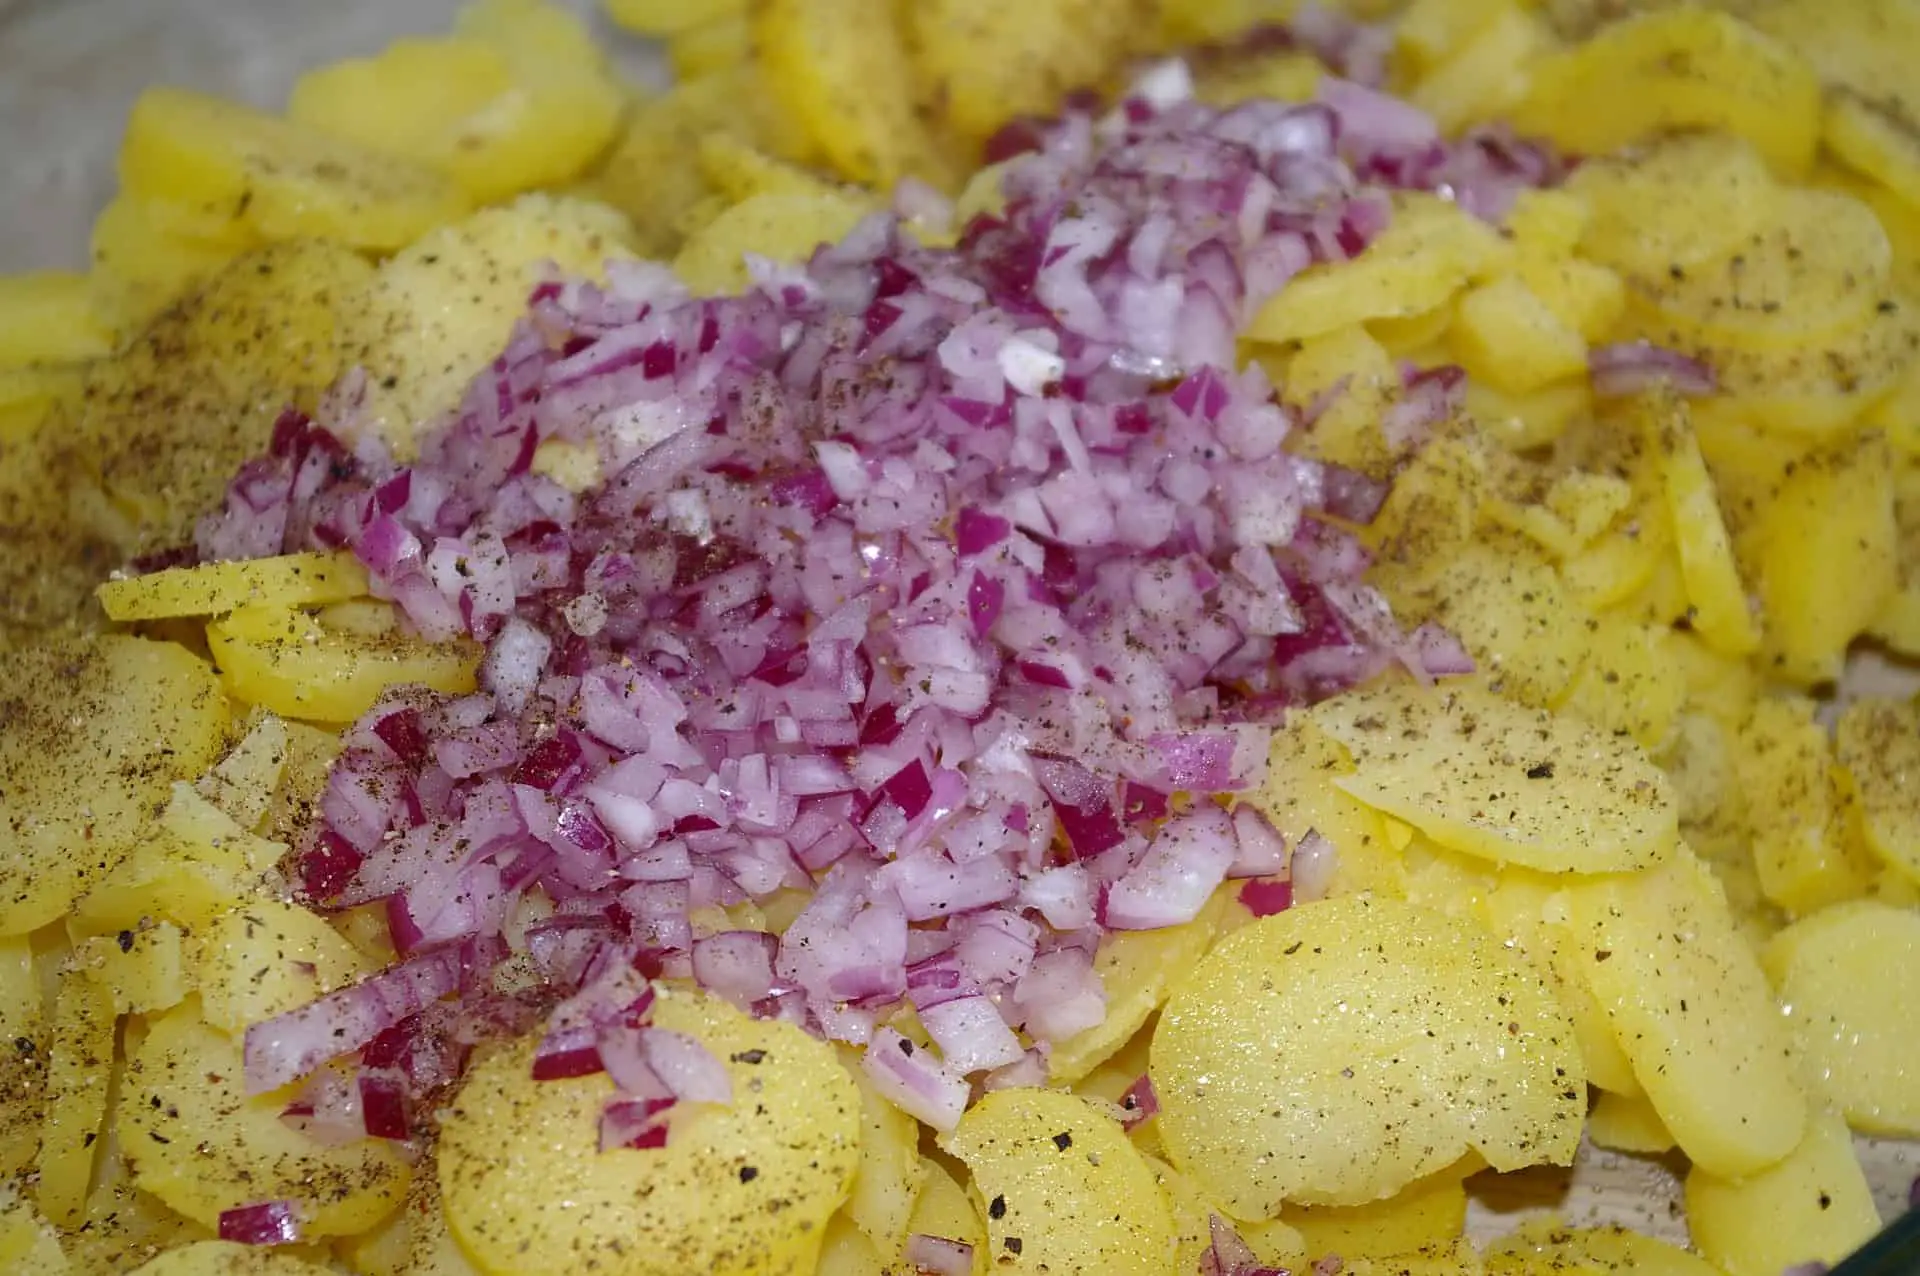 Potatoes seasoned with onions and black pepper